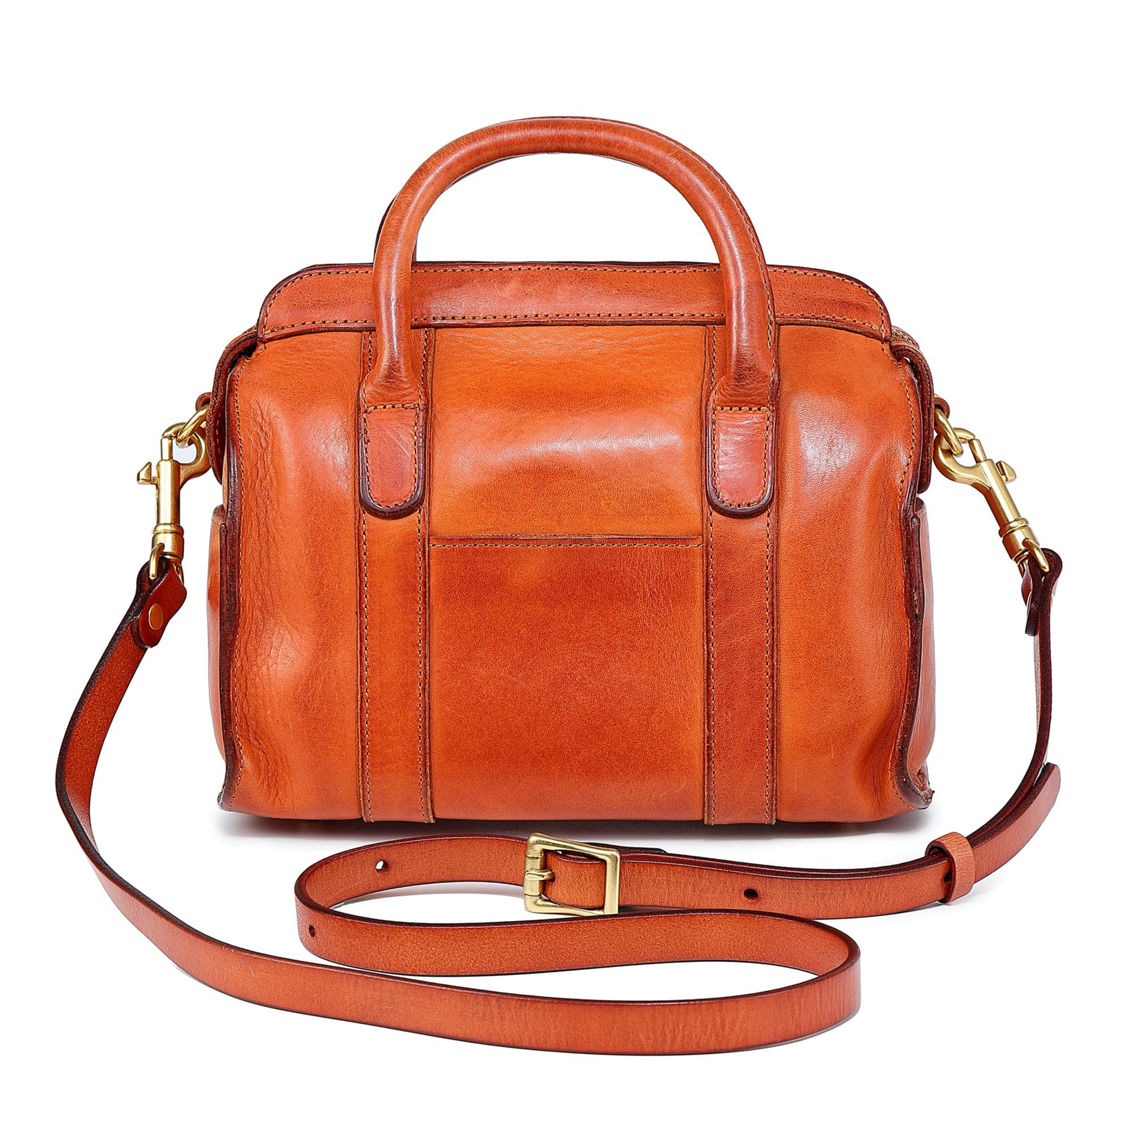 Old Trend Larkspur Leather Crossbody - Image 4 of 5